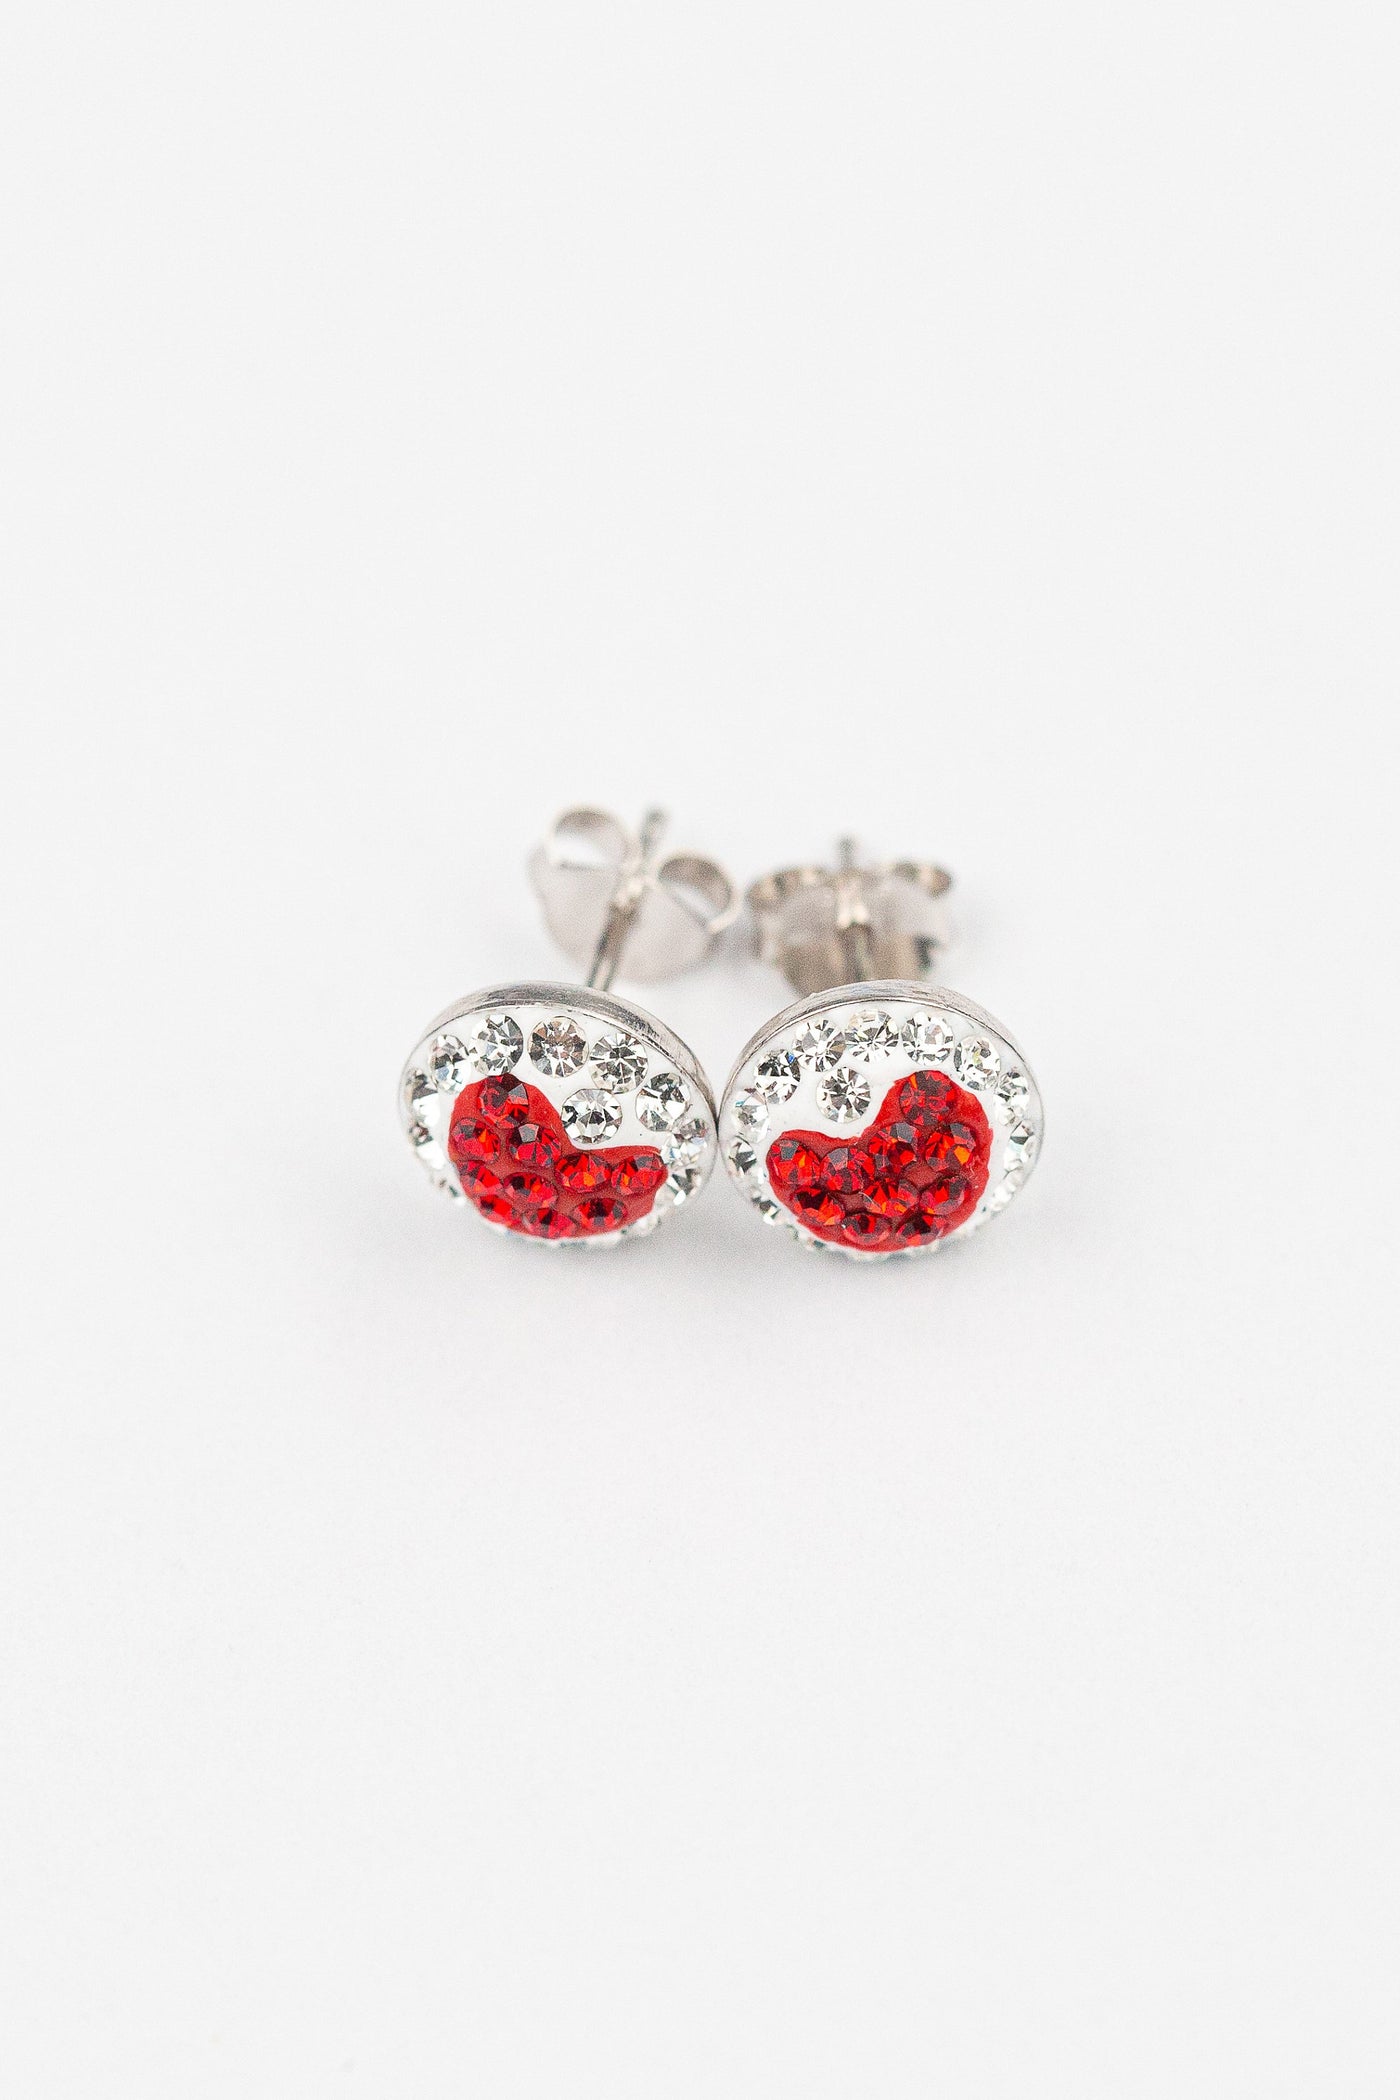 8mm Round Crystal Heart Stud Silver Earrings in Red | Annie and Sisters | sister stud earrings, for kids, children's jewelry, kid's jewelry, best friend